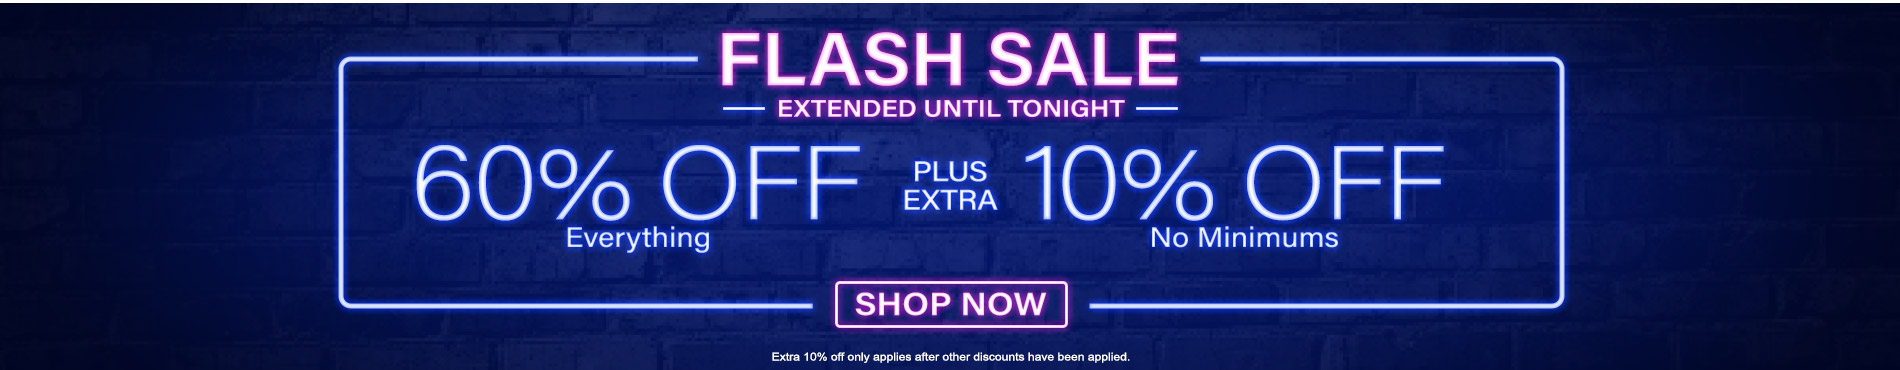 60% off everything + extra 10% off everything